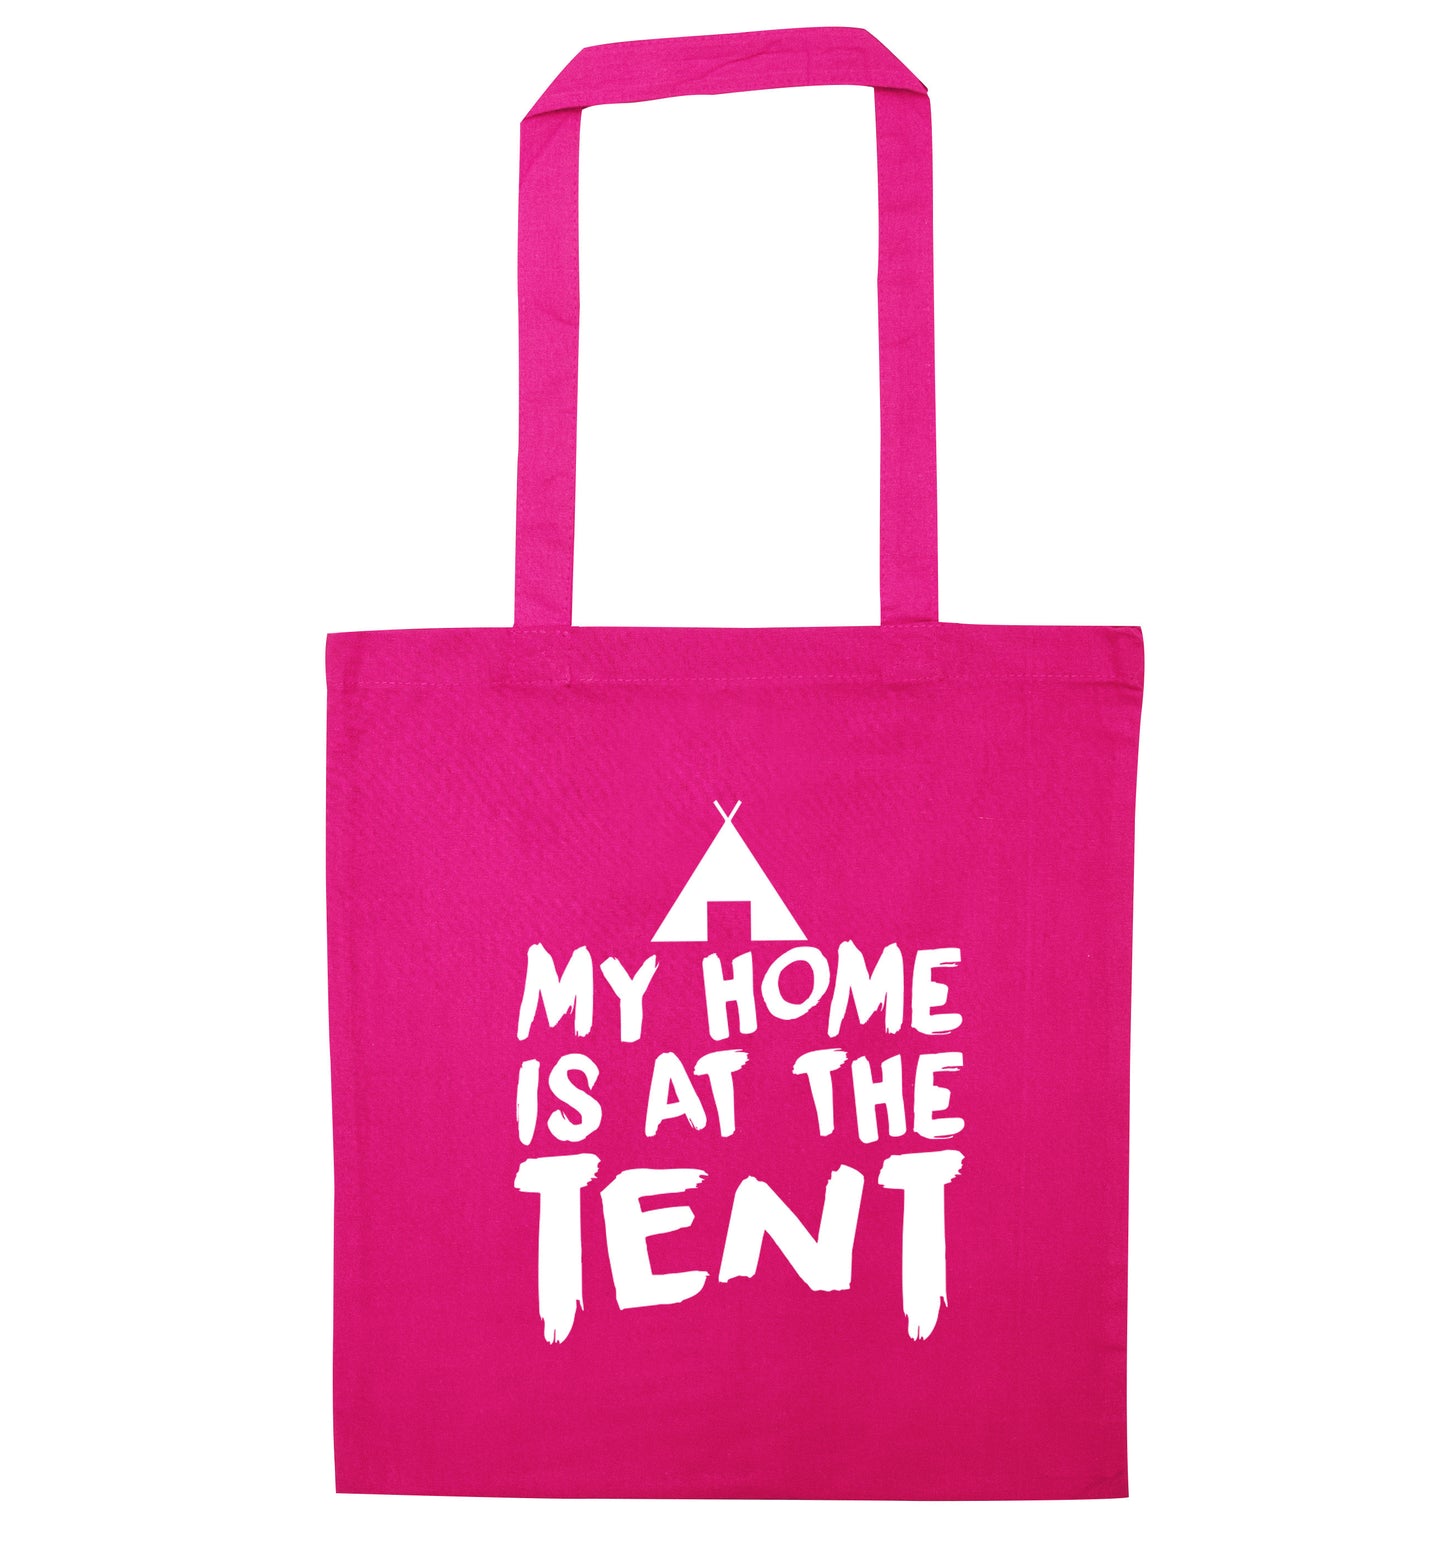 My home is at the tent pink tote bag